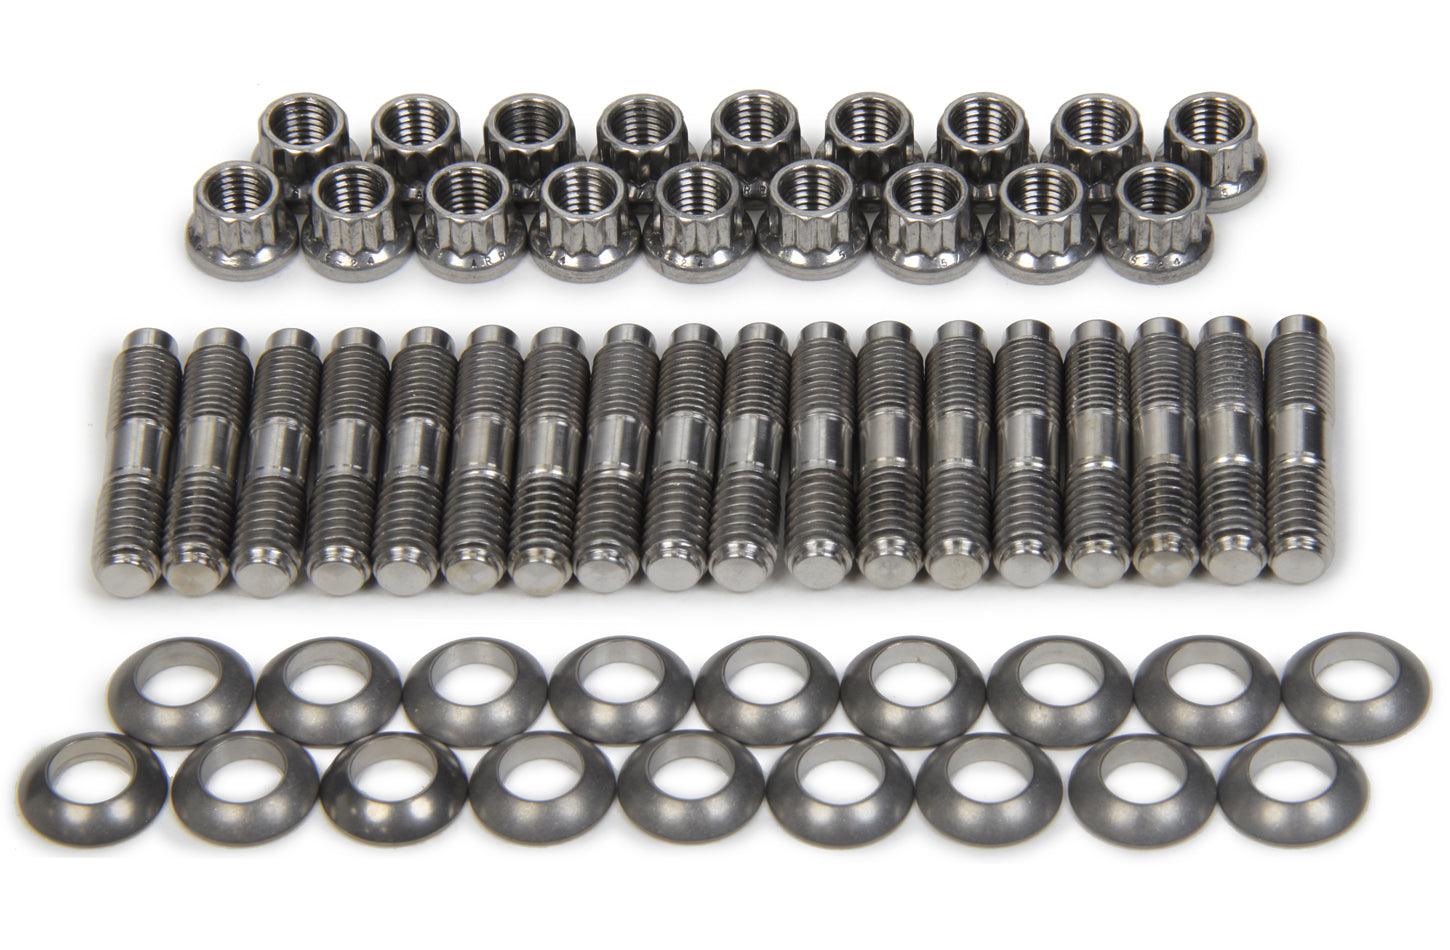 5/16 Fastener Kit for PS1/PM1 Wheels - Burlile Performance Products